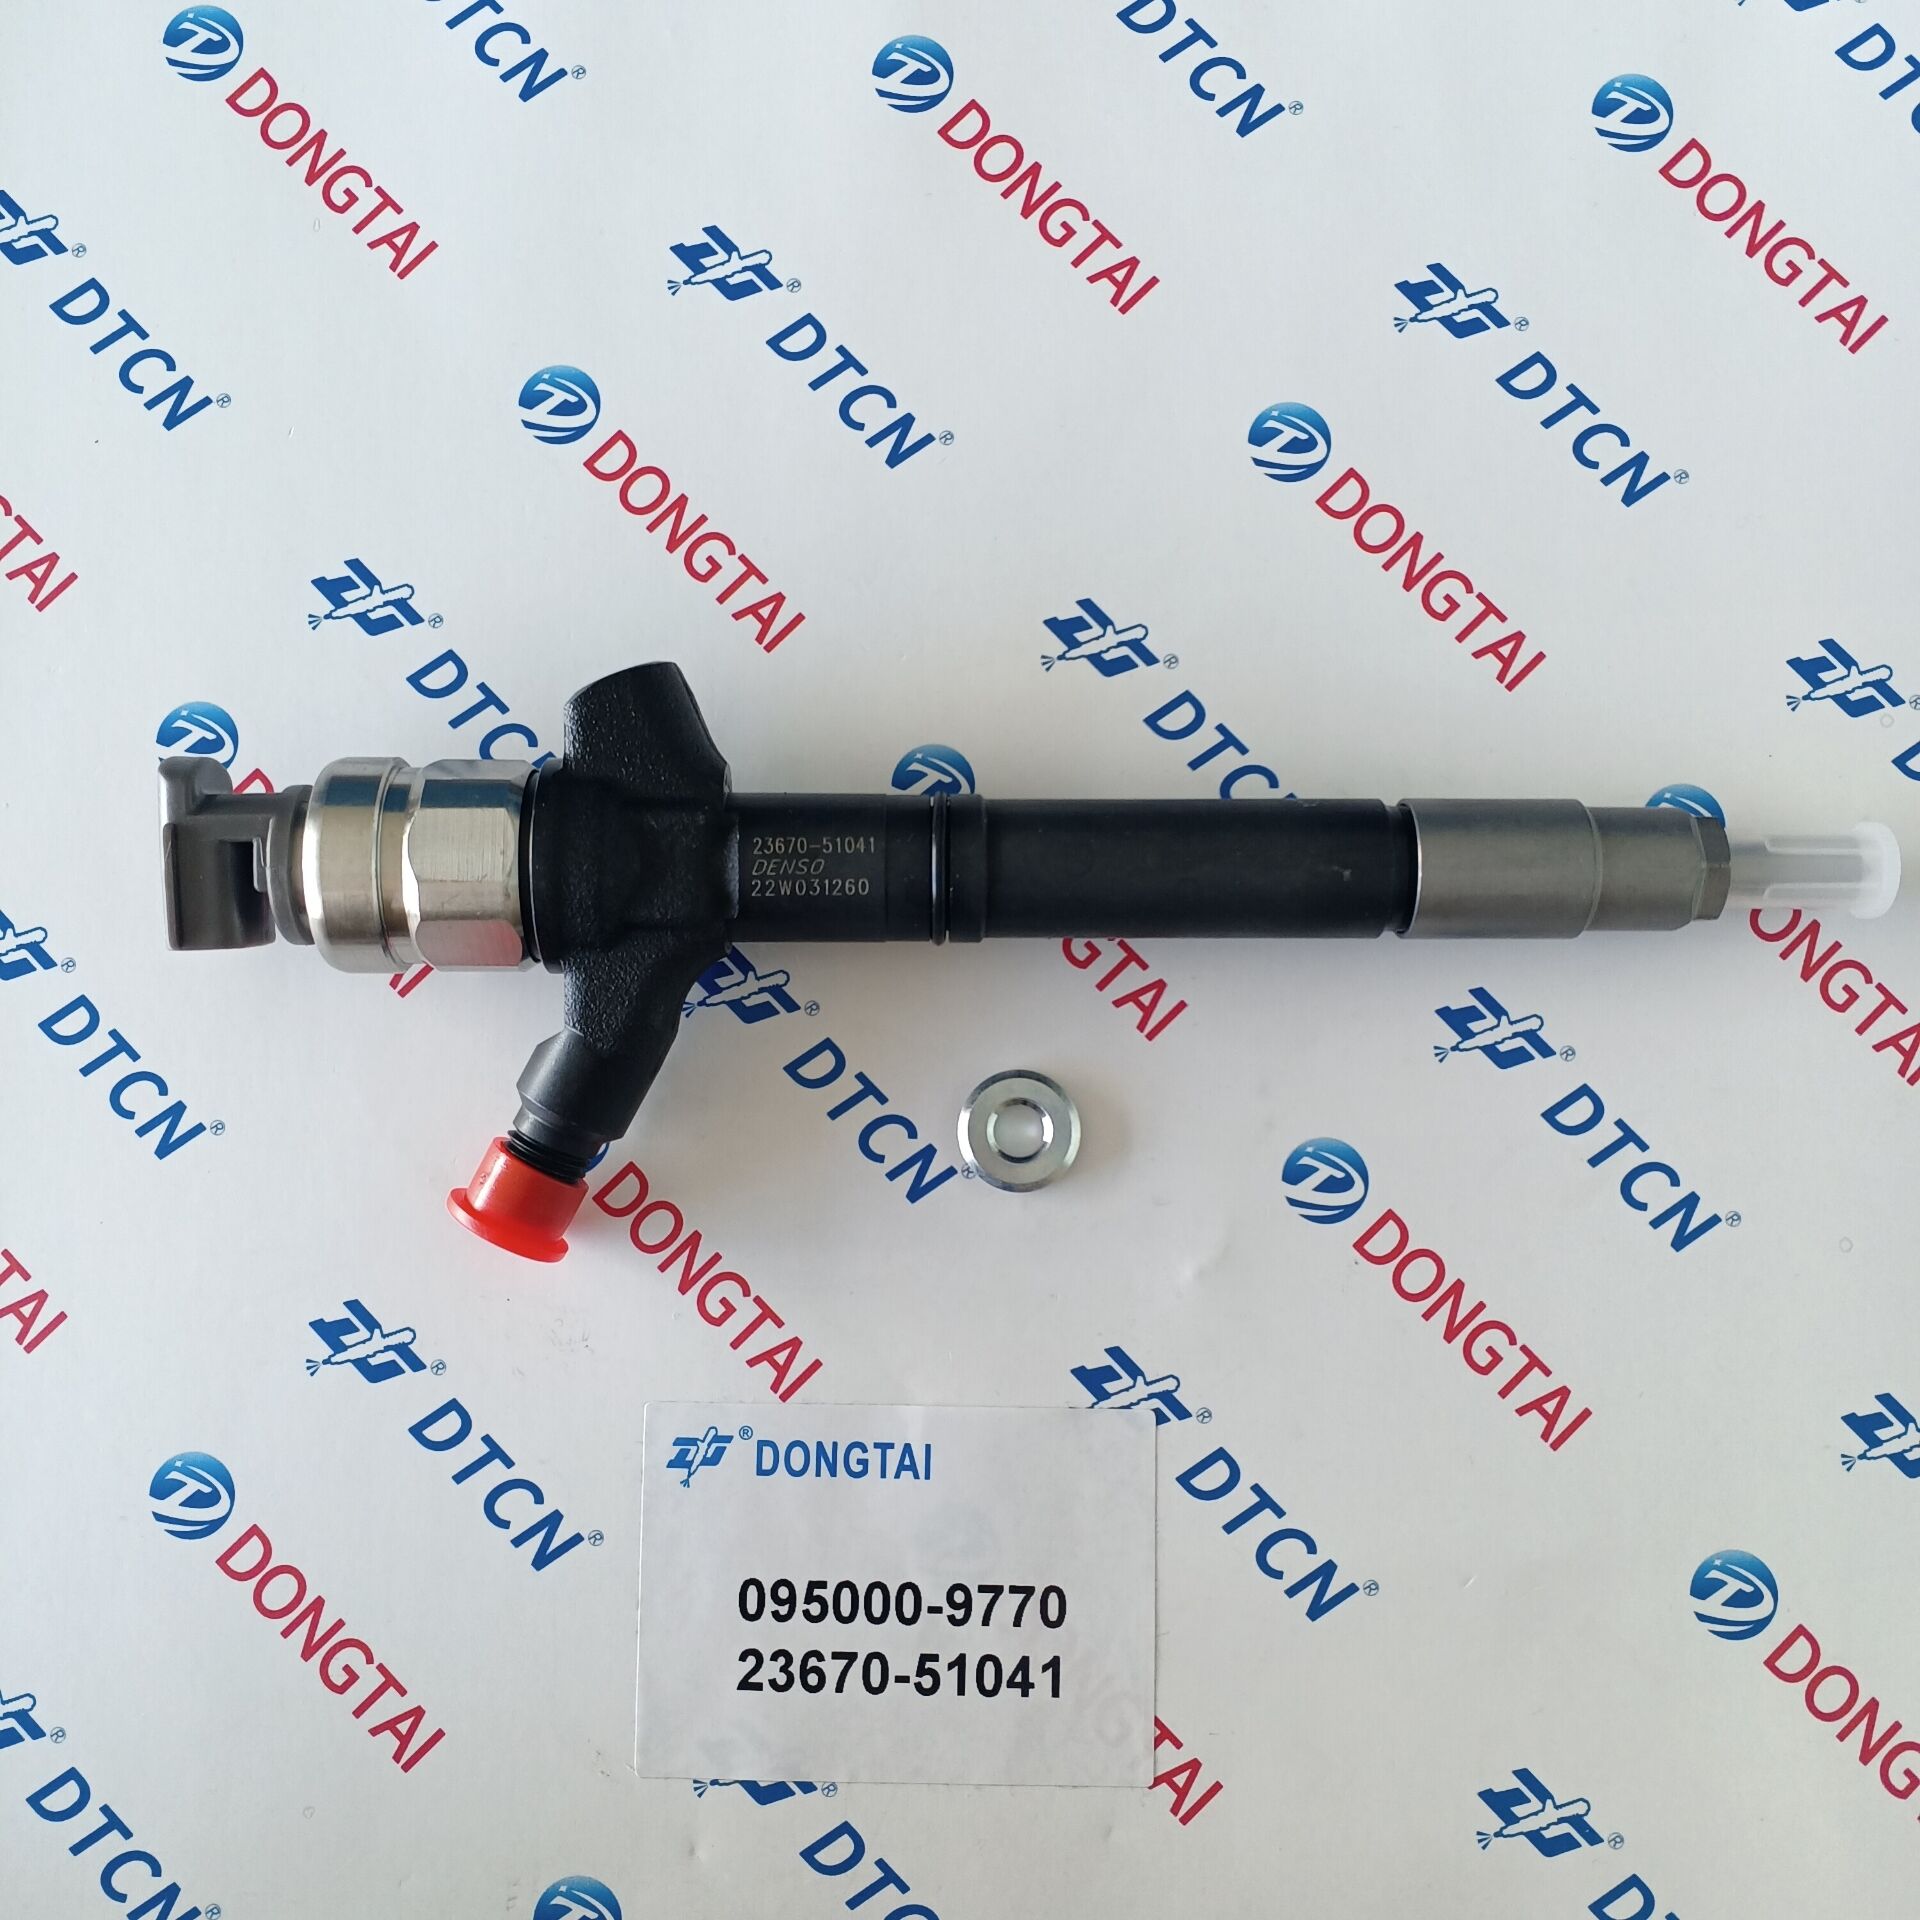 Short Lead Time for Special Puller (For Bosch 617 Valve) - DENSO Common Rail Injector 095000-9770, 23670-51041 For TOYOTA Land Cruiser 1VD-FTV Engine  – Dongtai